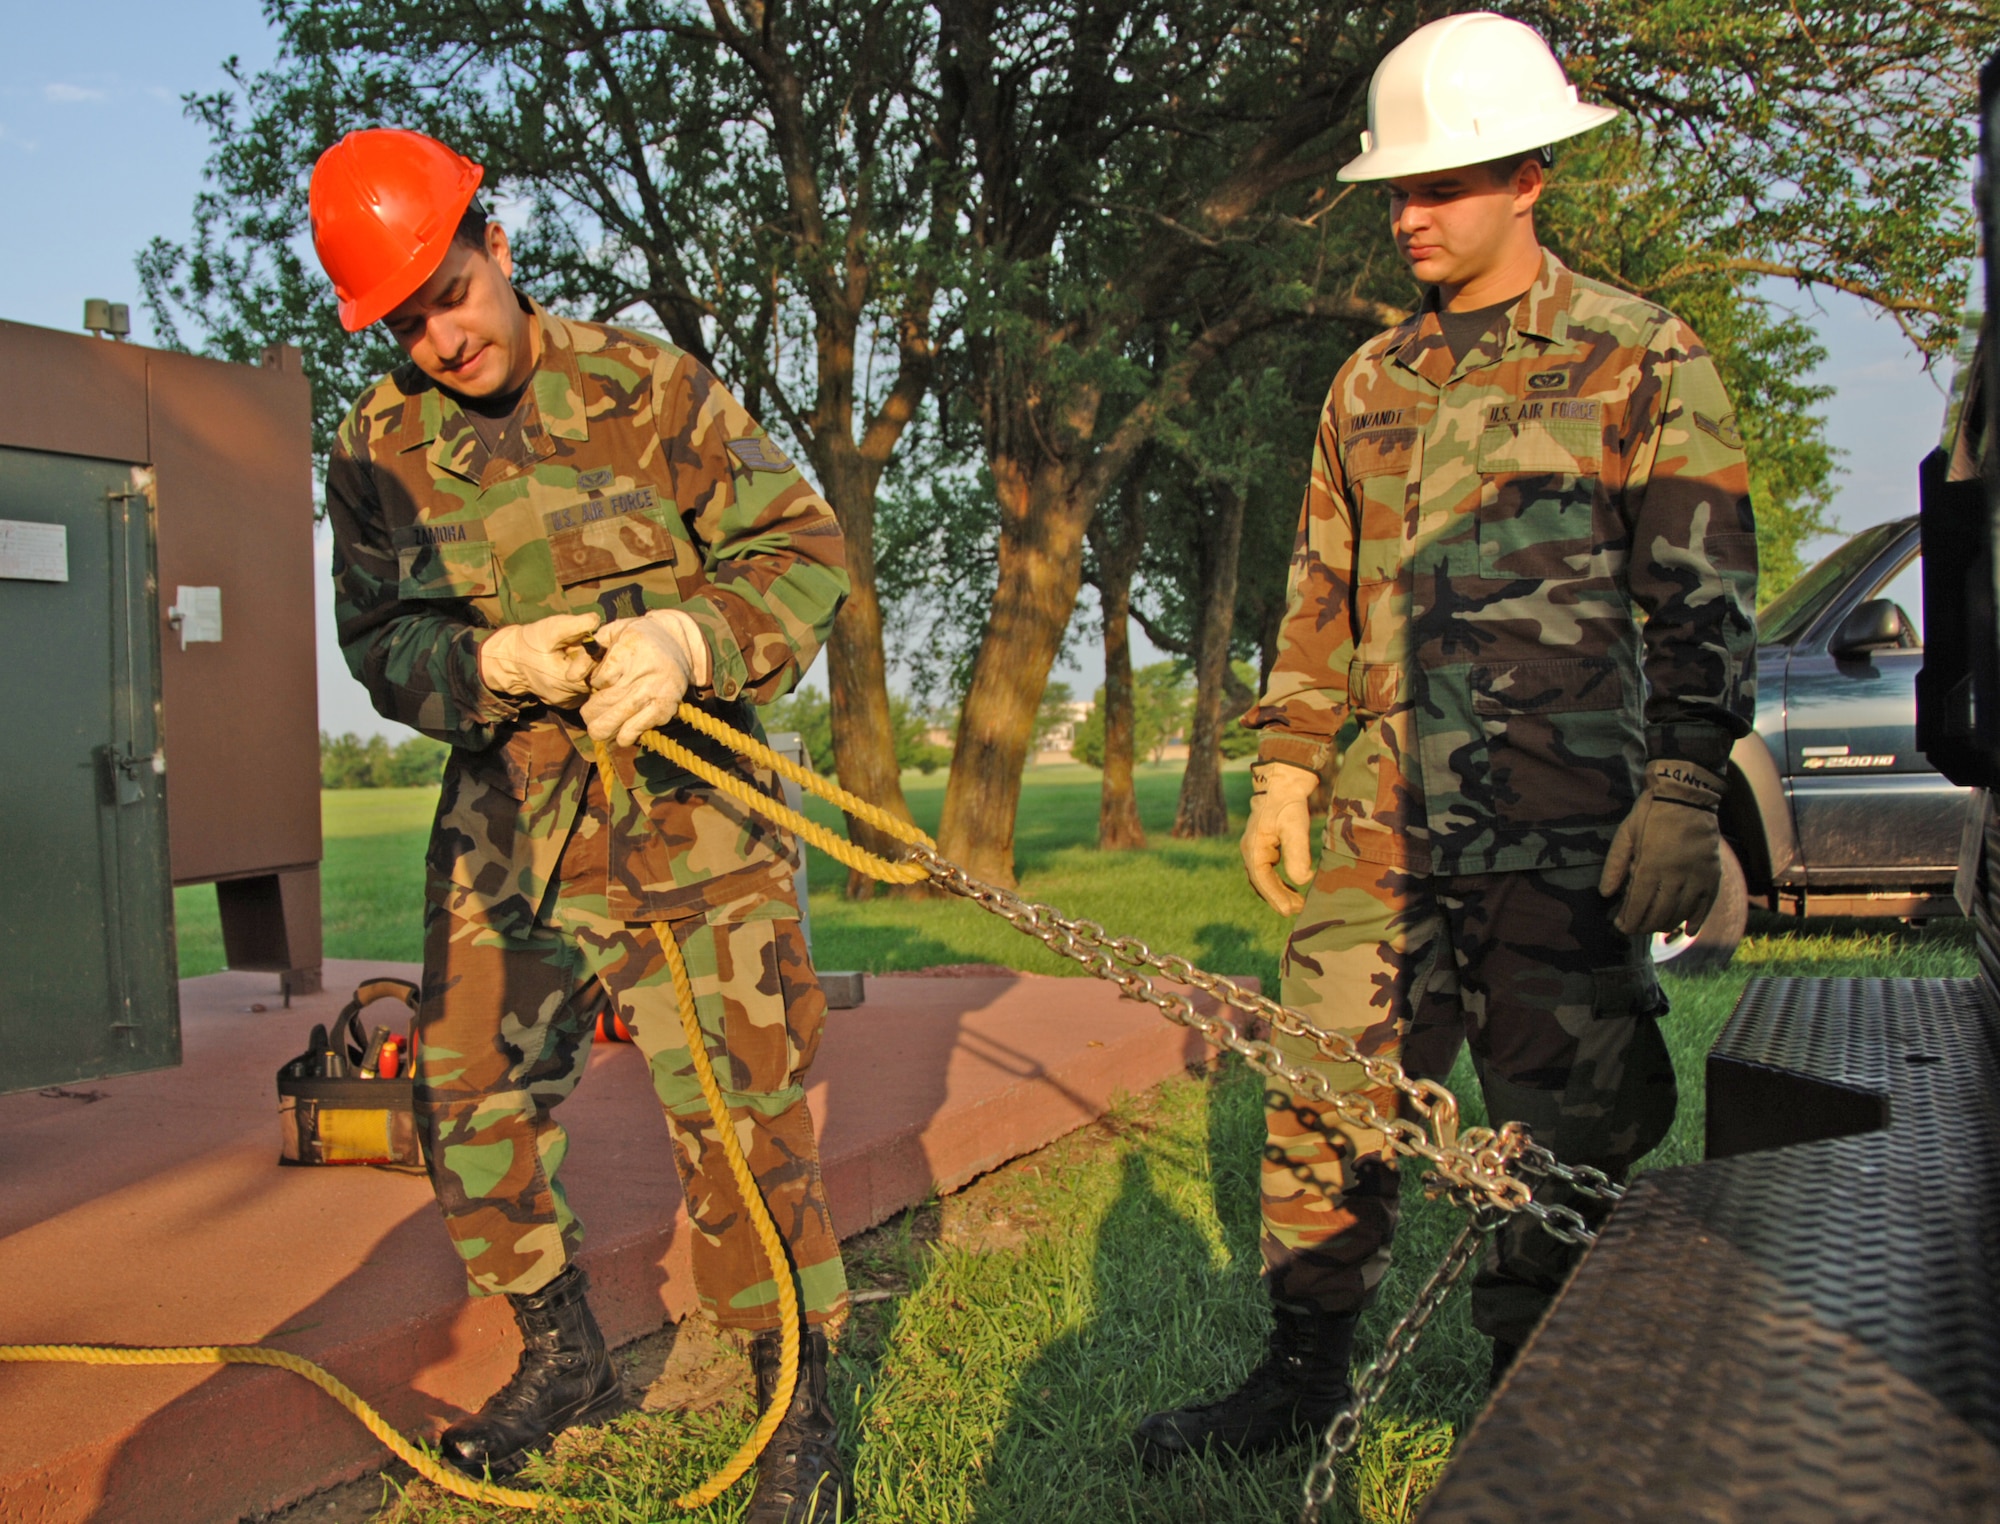 Airman Basic Brad Vanzandt (right), a Reservist assigned to the 931st Civil Engineer Squadron, watches Staff Sgt. Michael Zamora prepare a chain and rope for pulling out underground wires near the main gate at McConnell Air Force Base, Kan. An Force Reserve program is providing funds for Airman Vanzandt to train with Sergeant Zamora and other active-duty engineers at McConnell. The program is designed to speed up the training of traditional Reservists beyond what one weekend a month and a few weeks a year usually allows. (U.S. Air Force photo/Tech. Sgt. Jason Schaap)